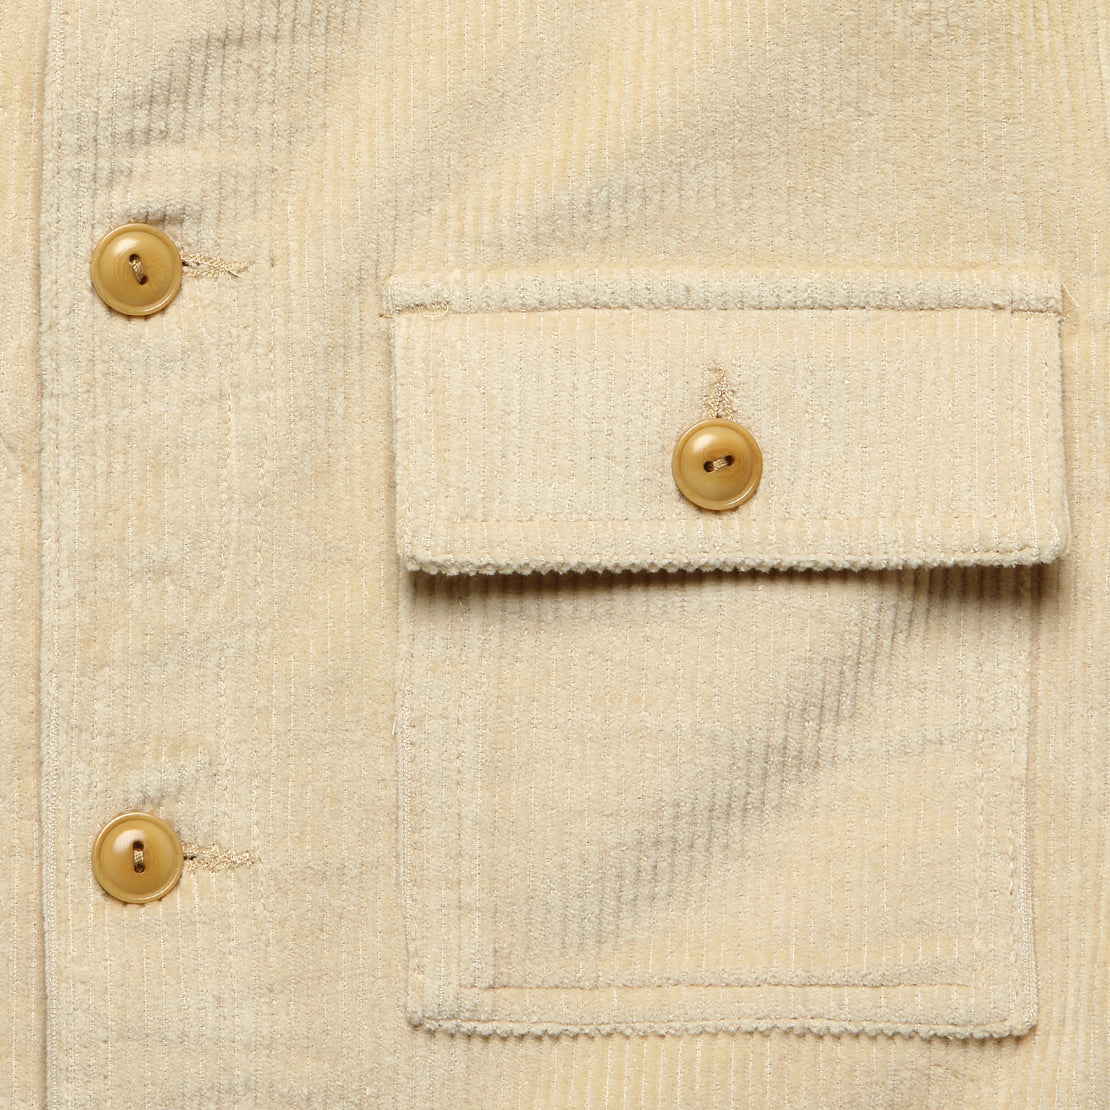 Wale Corduroy Chore Jacket - Off White - Schott - STAG Provisions - Outerwear - Shirt Jacket